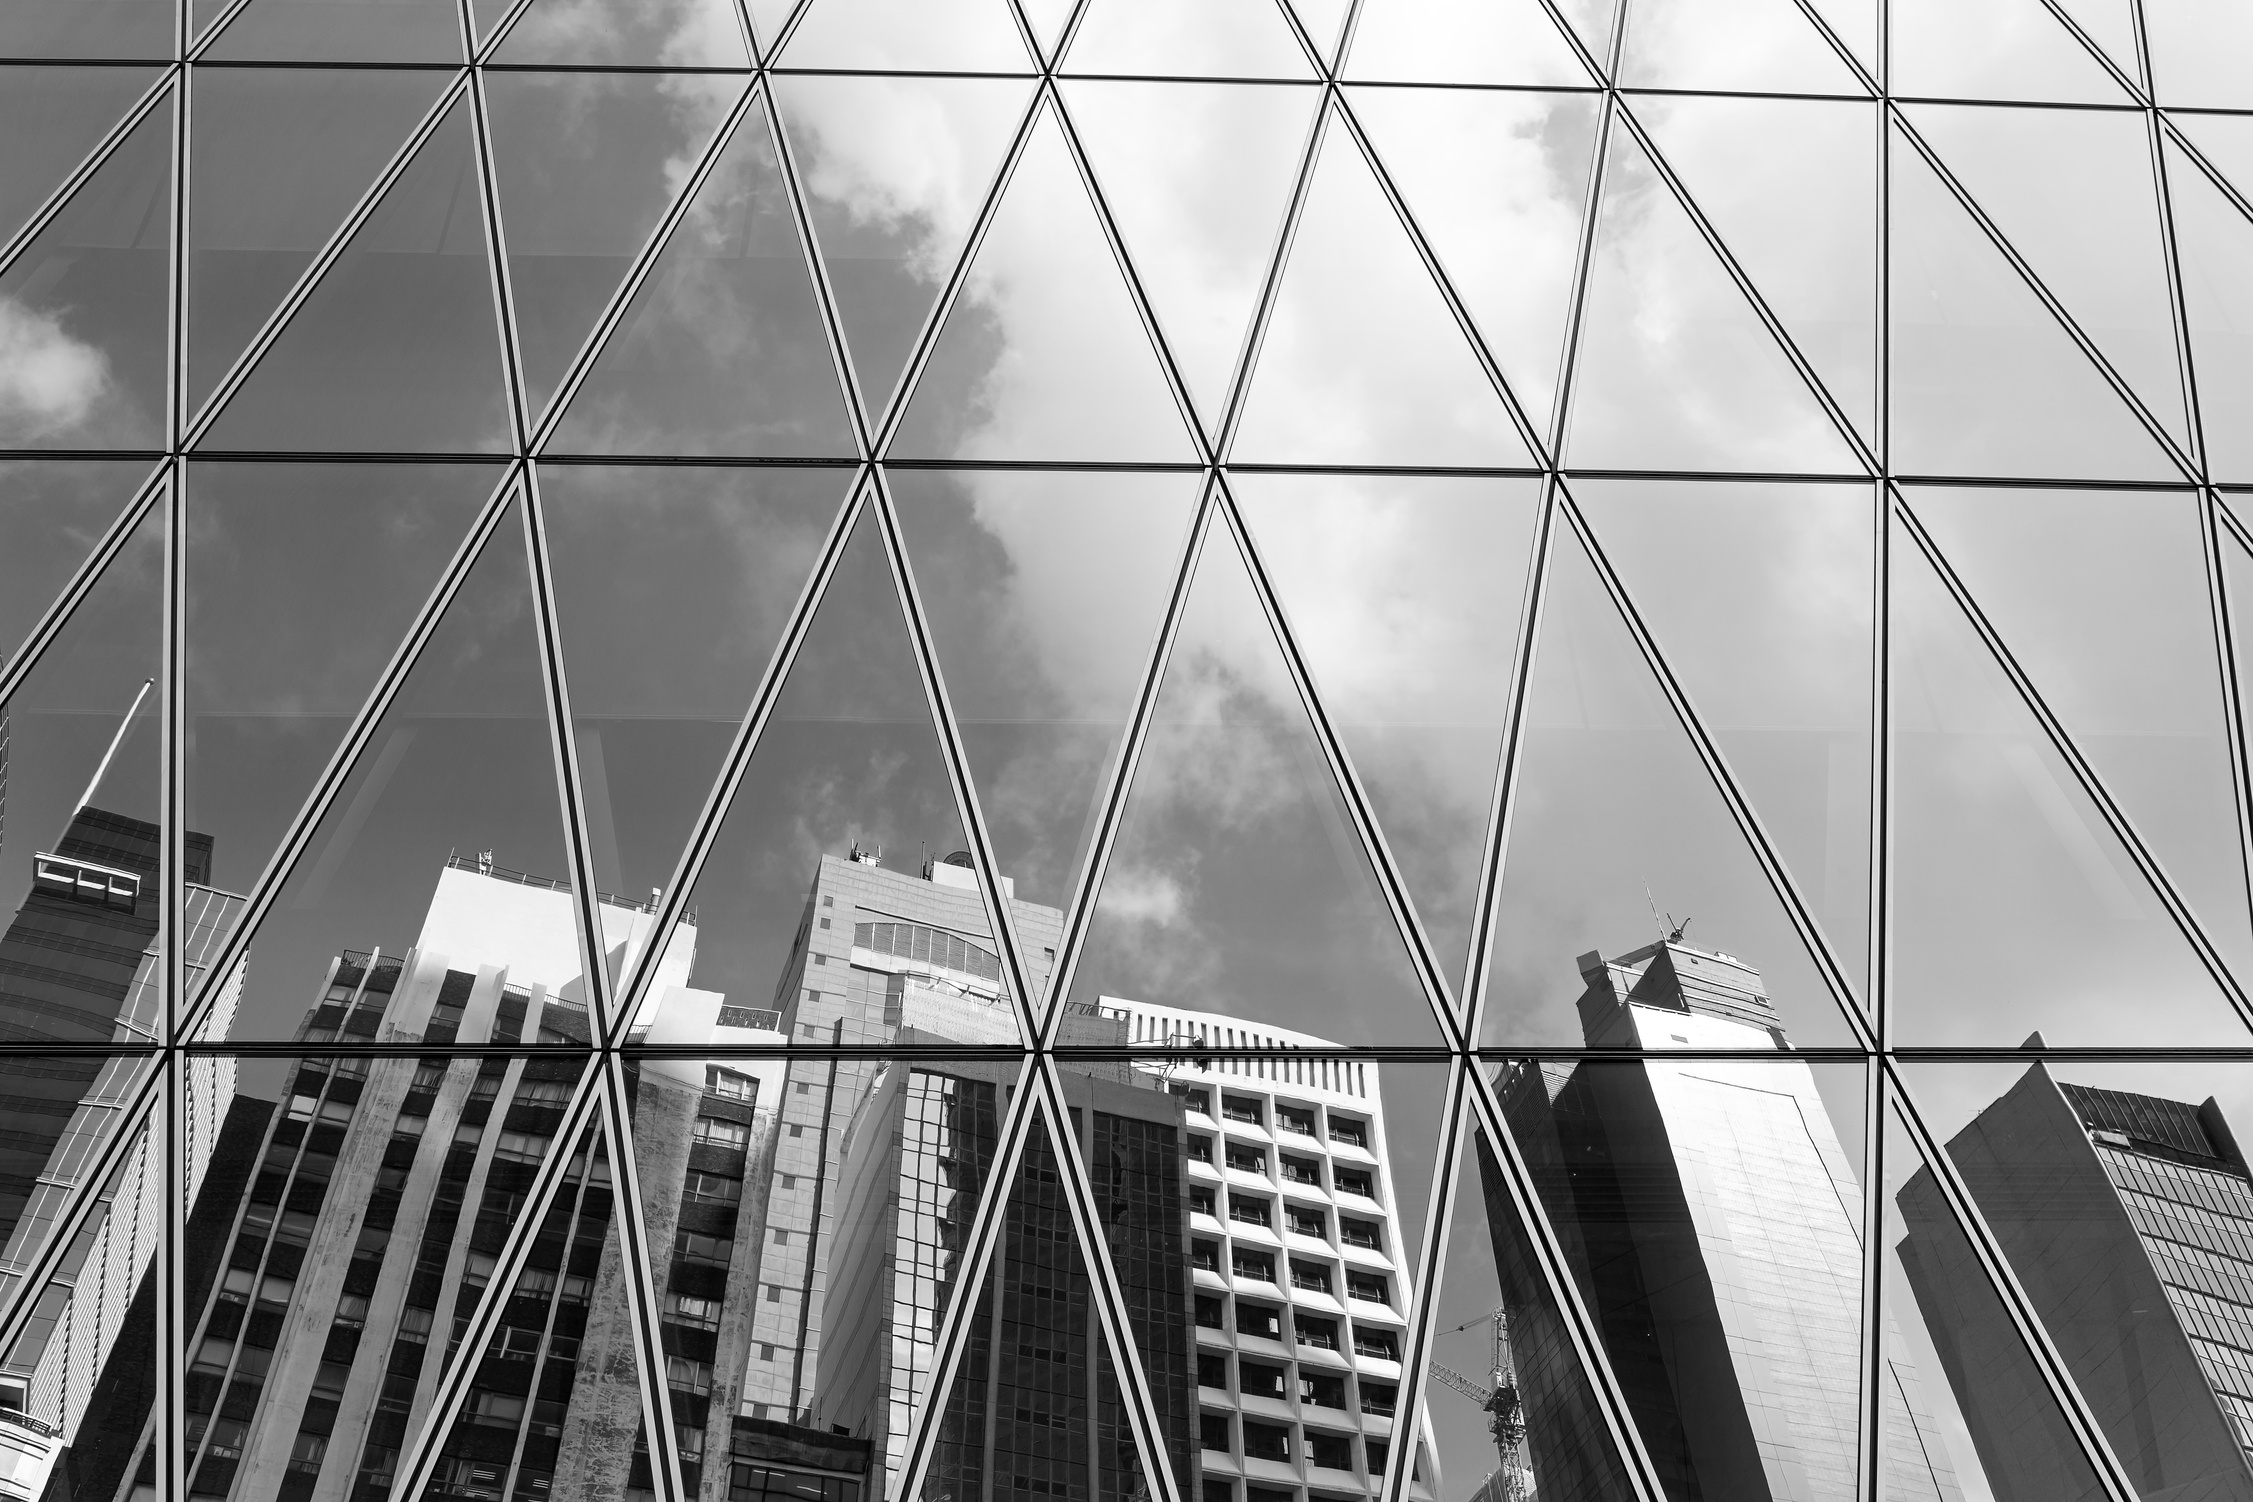 Mirrored office buildings (black and white)